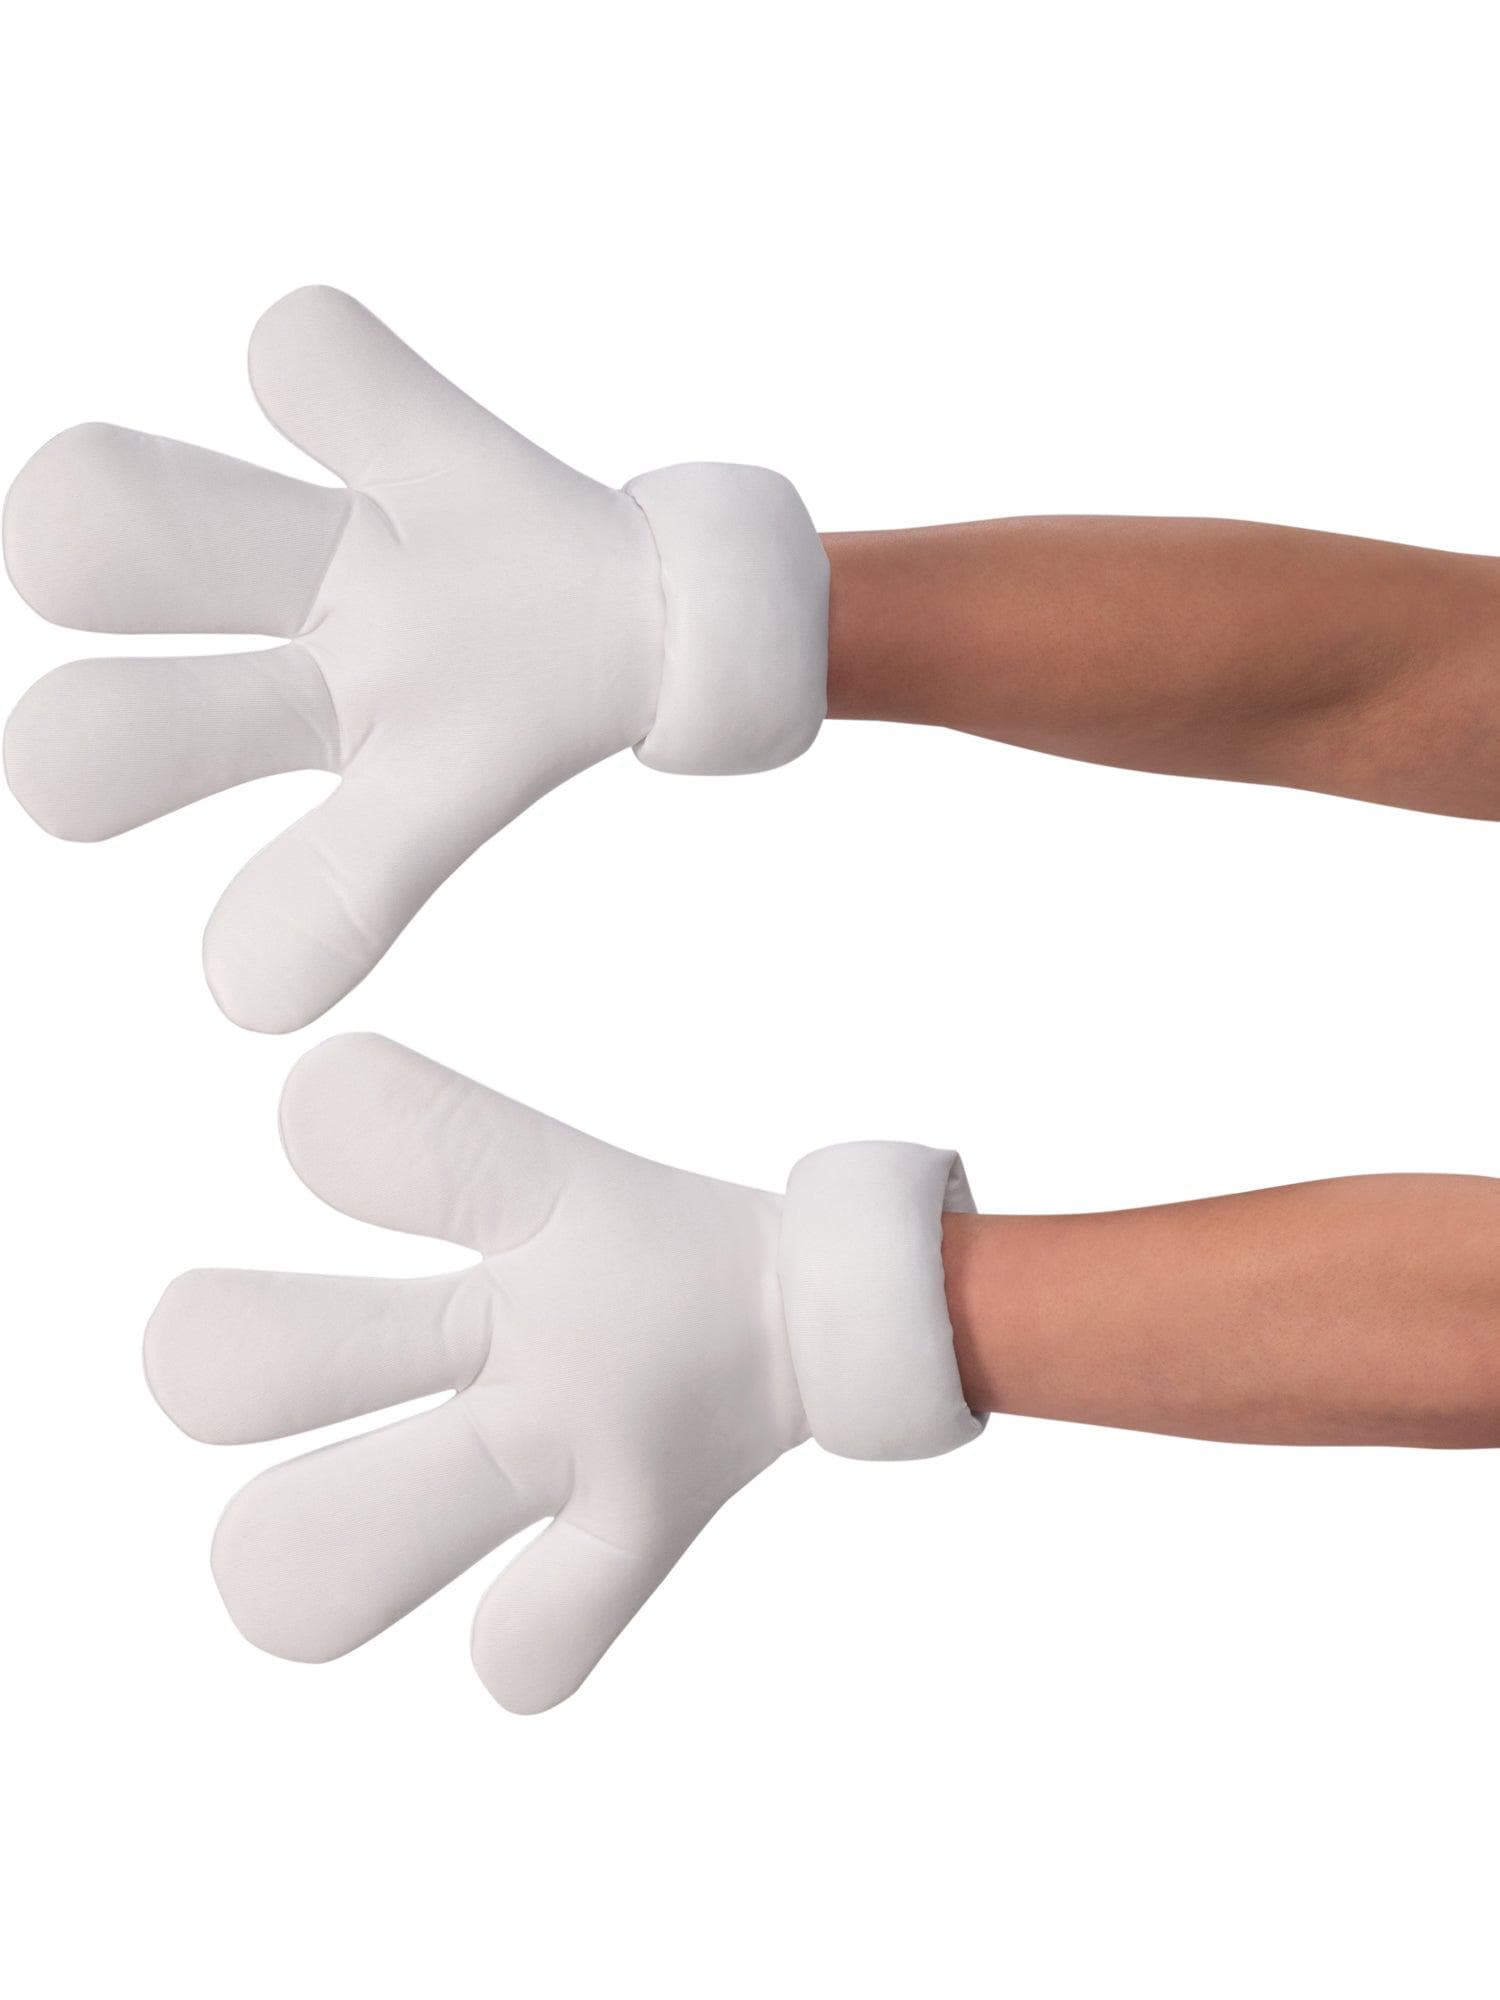 Adult Space Jam: A New Legacy Bugs Bunny Gloves - costumes.com